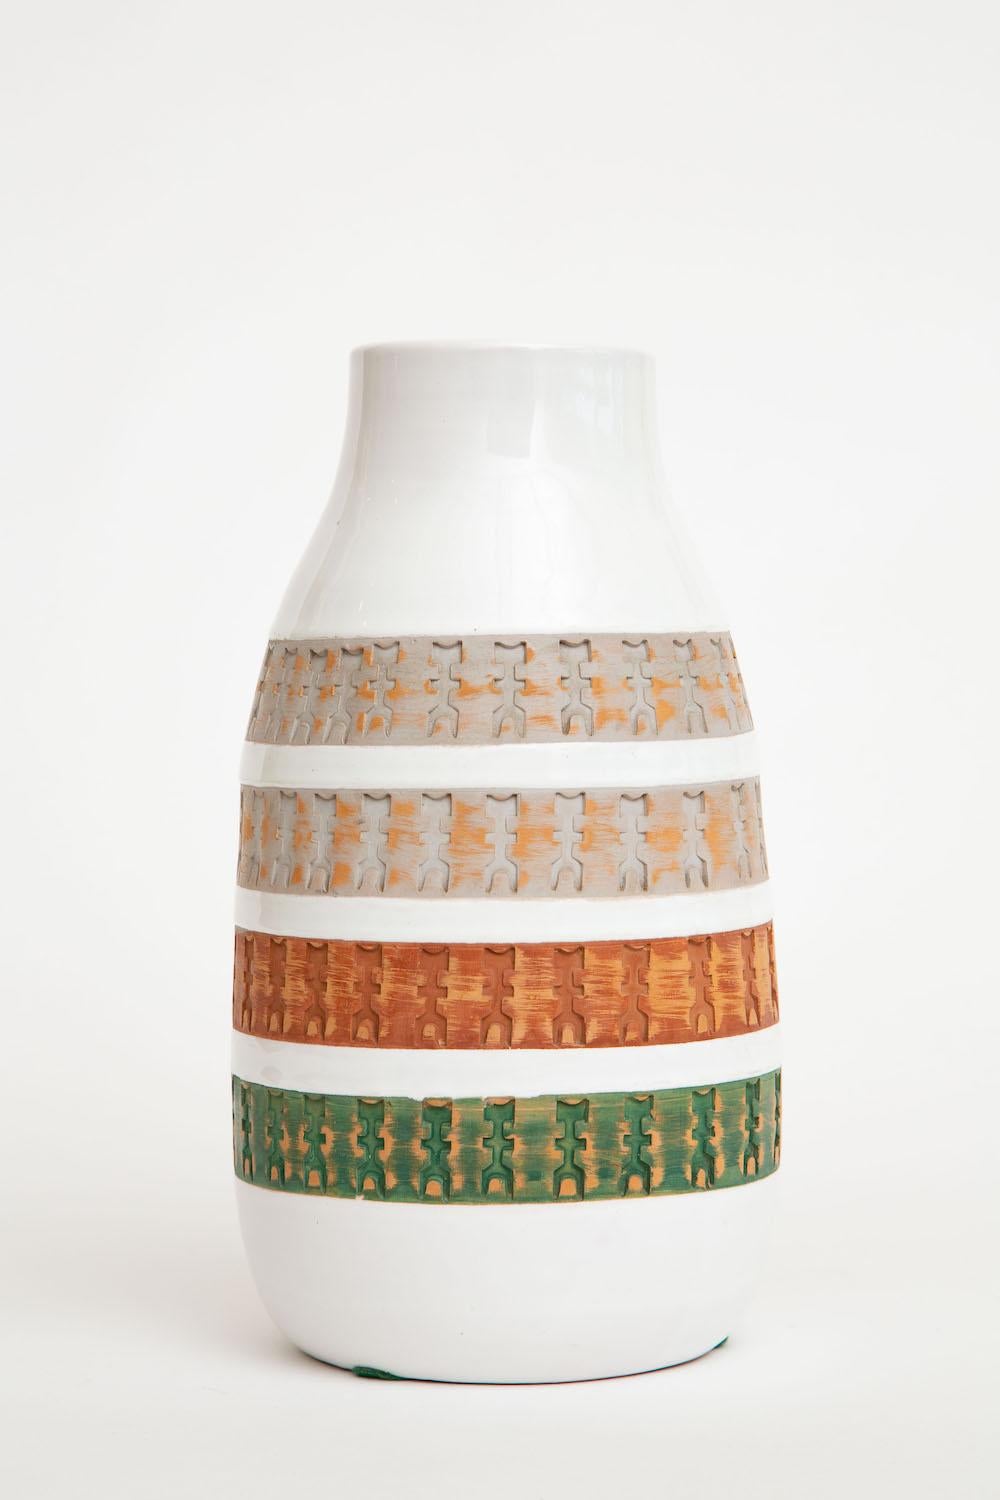 This special and hard to come by Italian Aldo Londi for Raymor Bitossi ceramic vase or vessel is vintage. It has 4 bands of incised etched textural Mayan style abstract inspired tribal designs and stick figures in varying bands of color. The rich